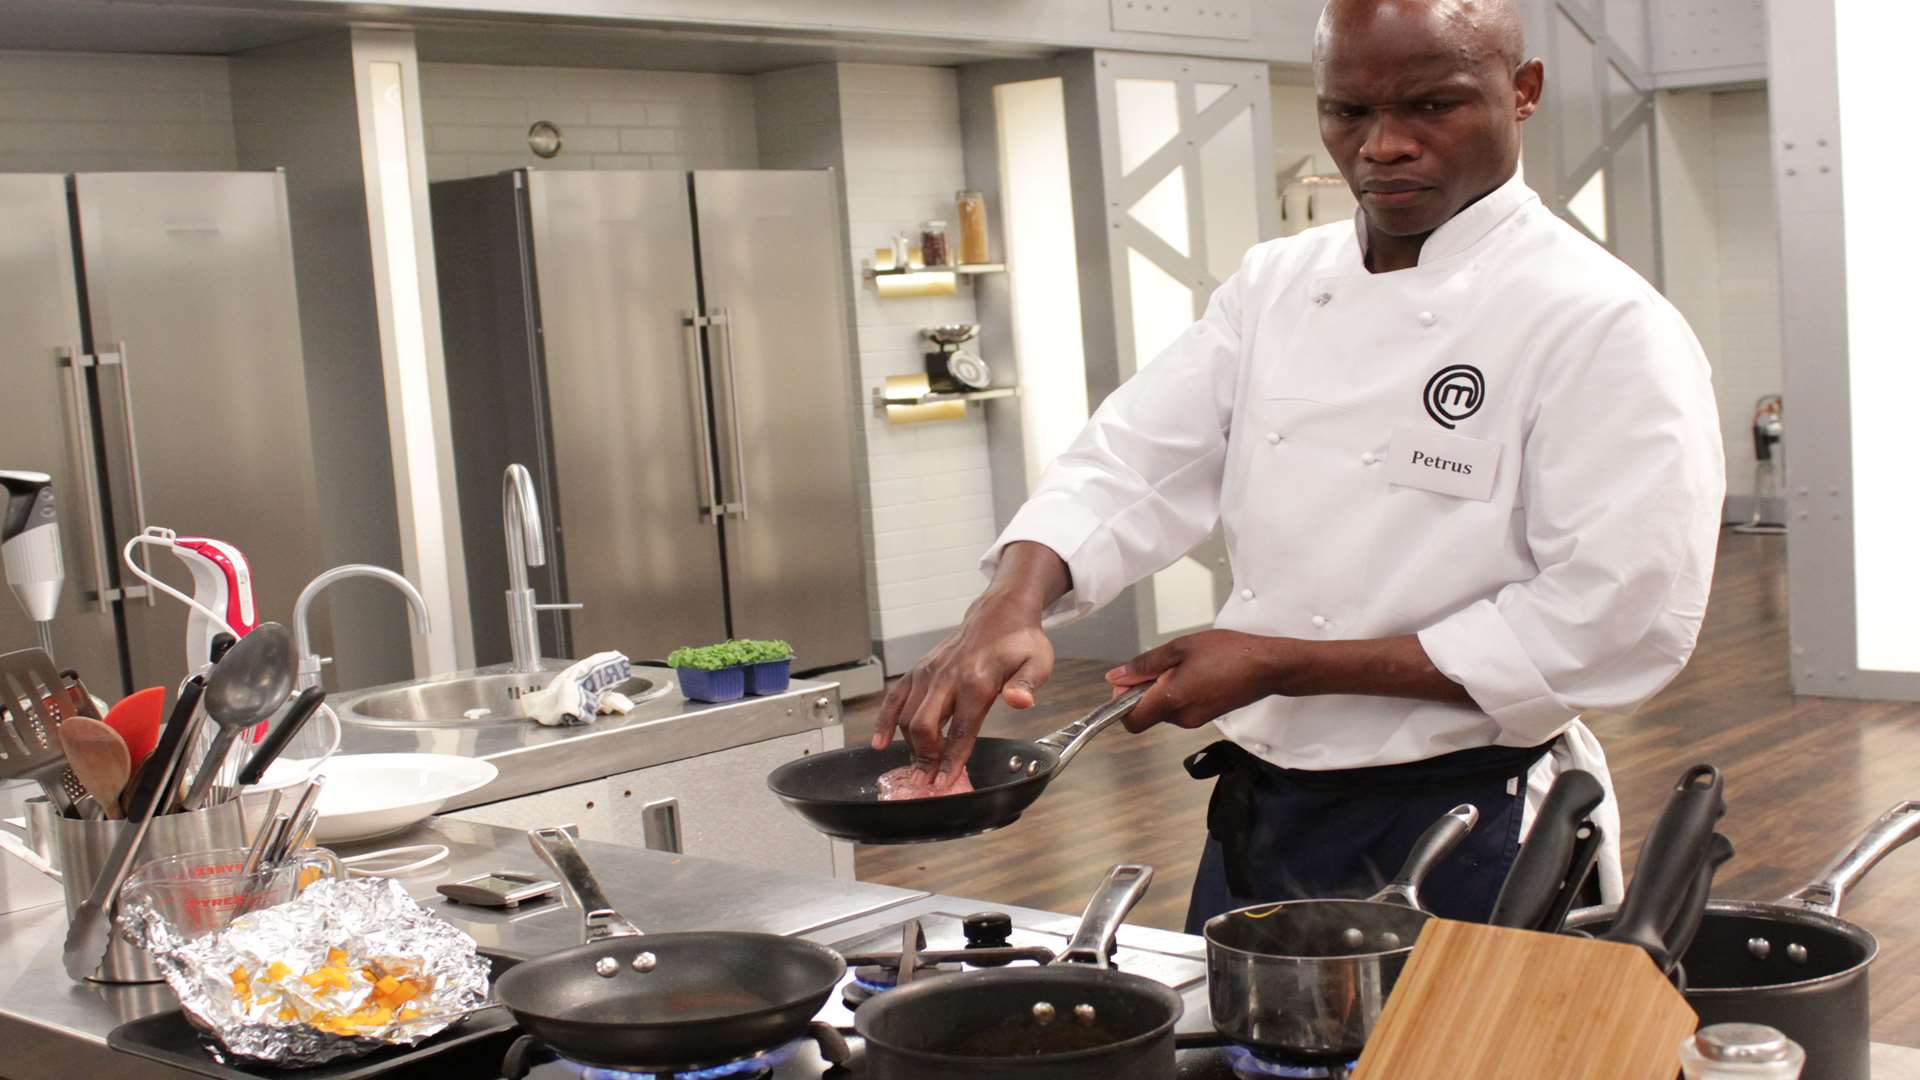 Aylesford chef Petrus Madutlela appears on BBC's MasterChef